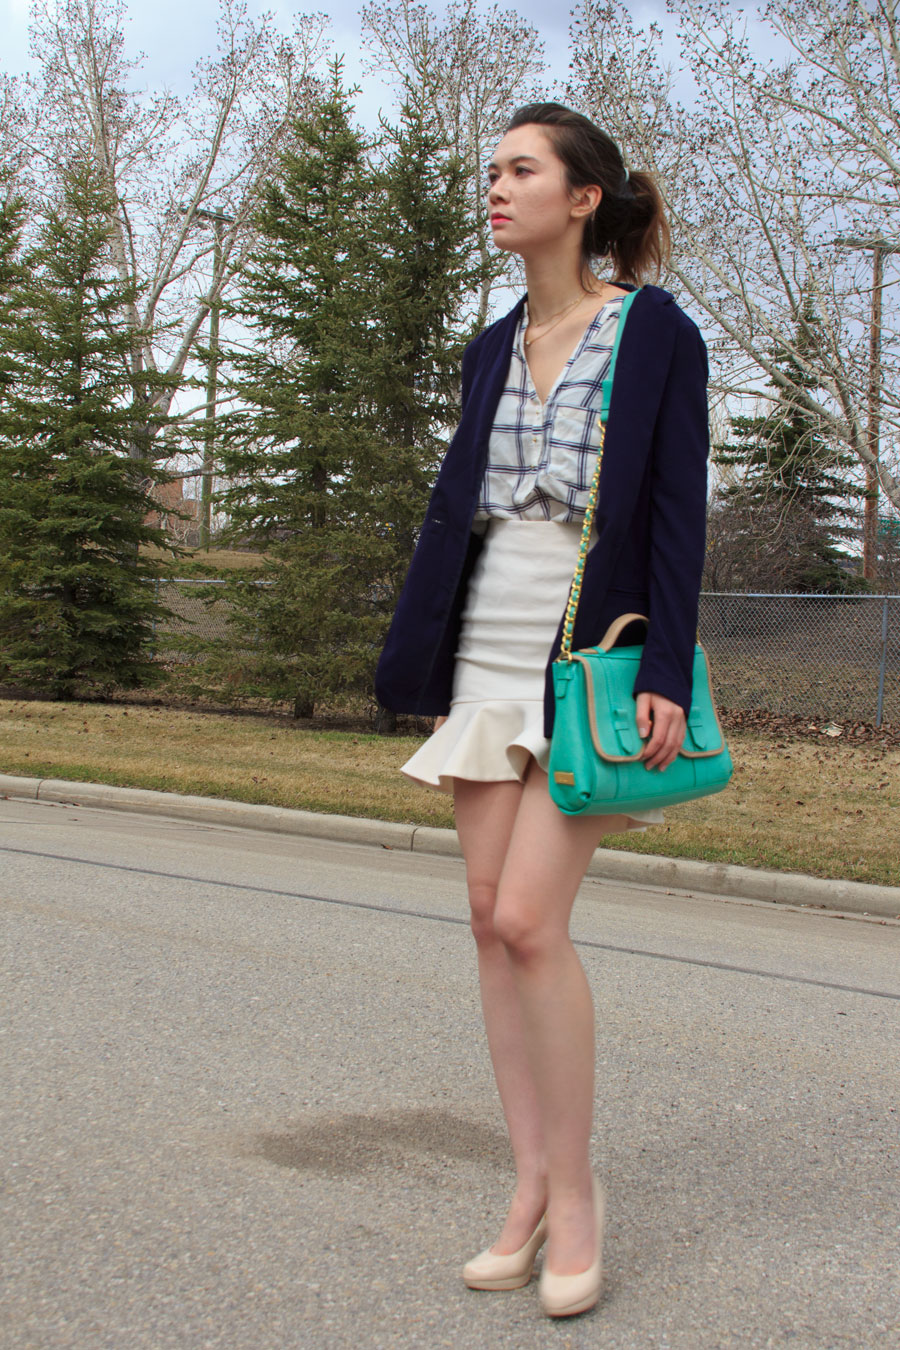 Dynamite, Zara, work wear, Spring Shoes, outfit, personal style, botkier, frilled skirt, peplum